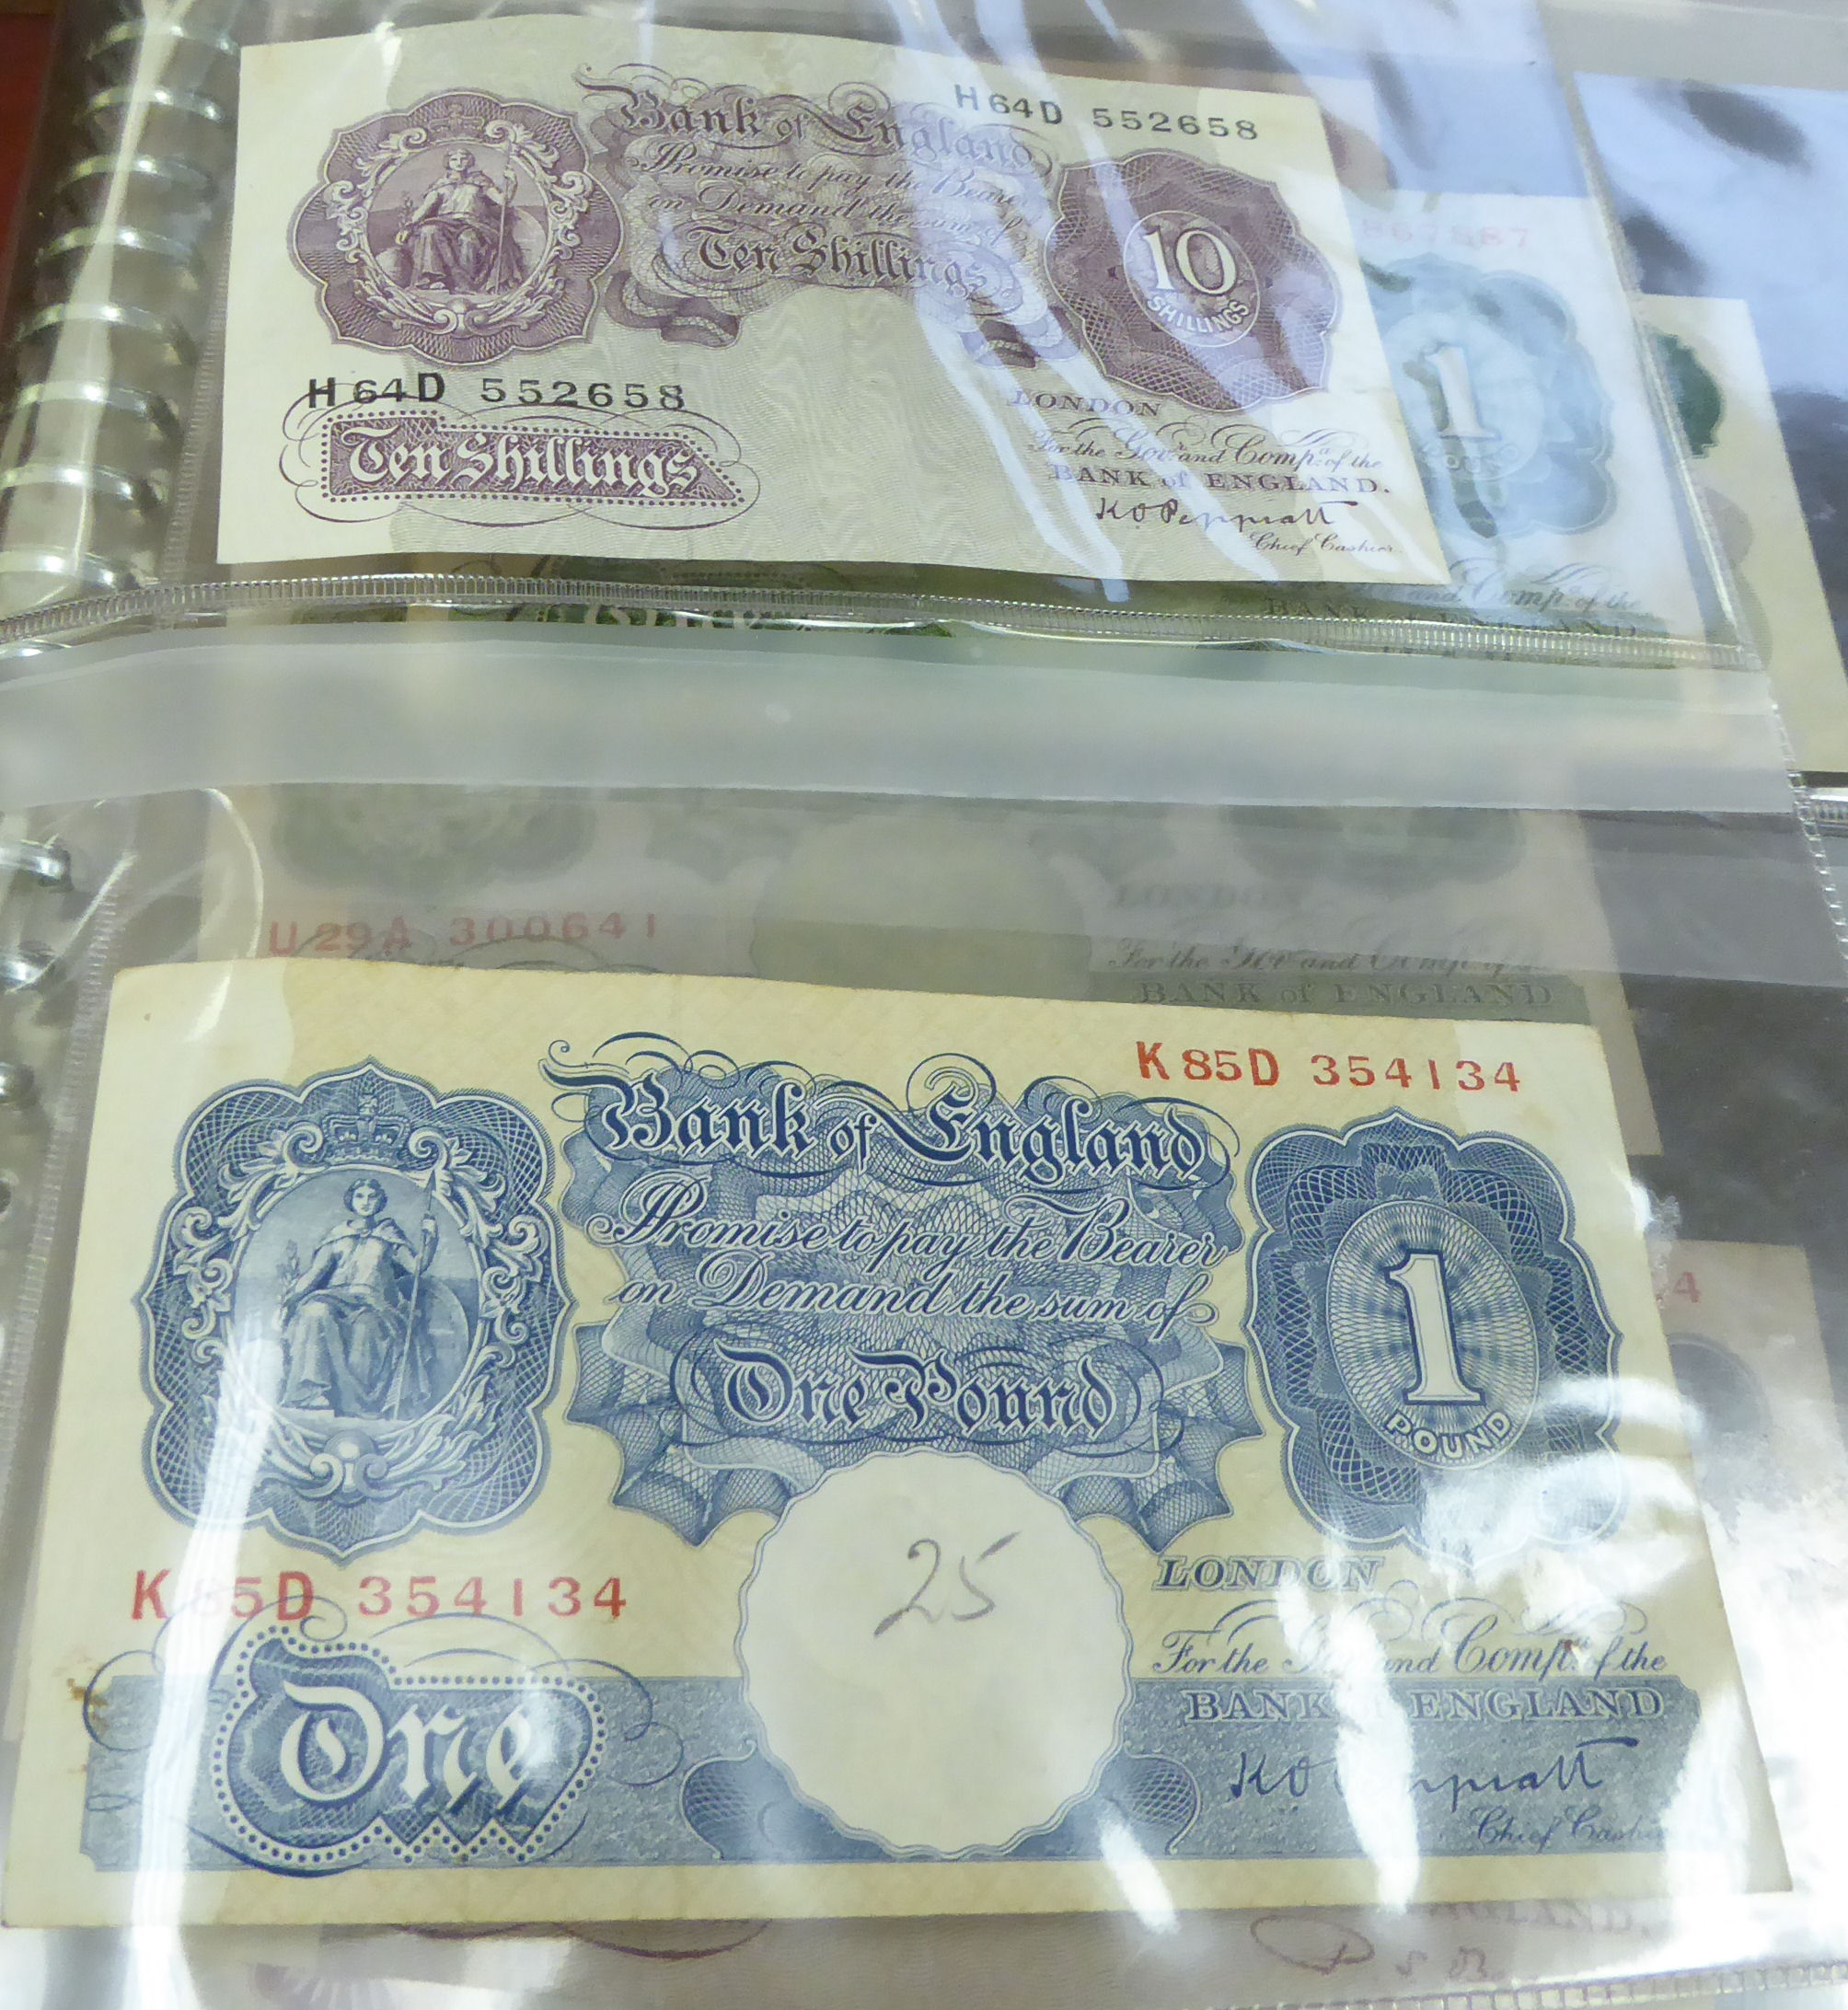 Two uncollated albums collections, containing banknotes from Peru, Uruguay, Turkey, China, Brazil, - Image 11 of 13